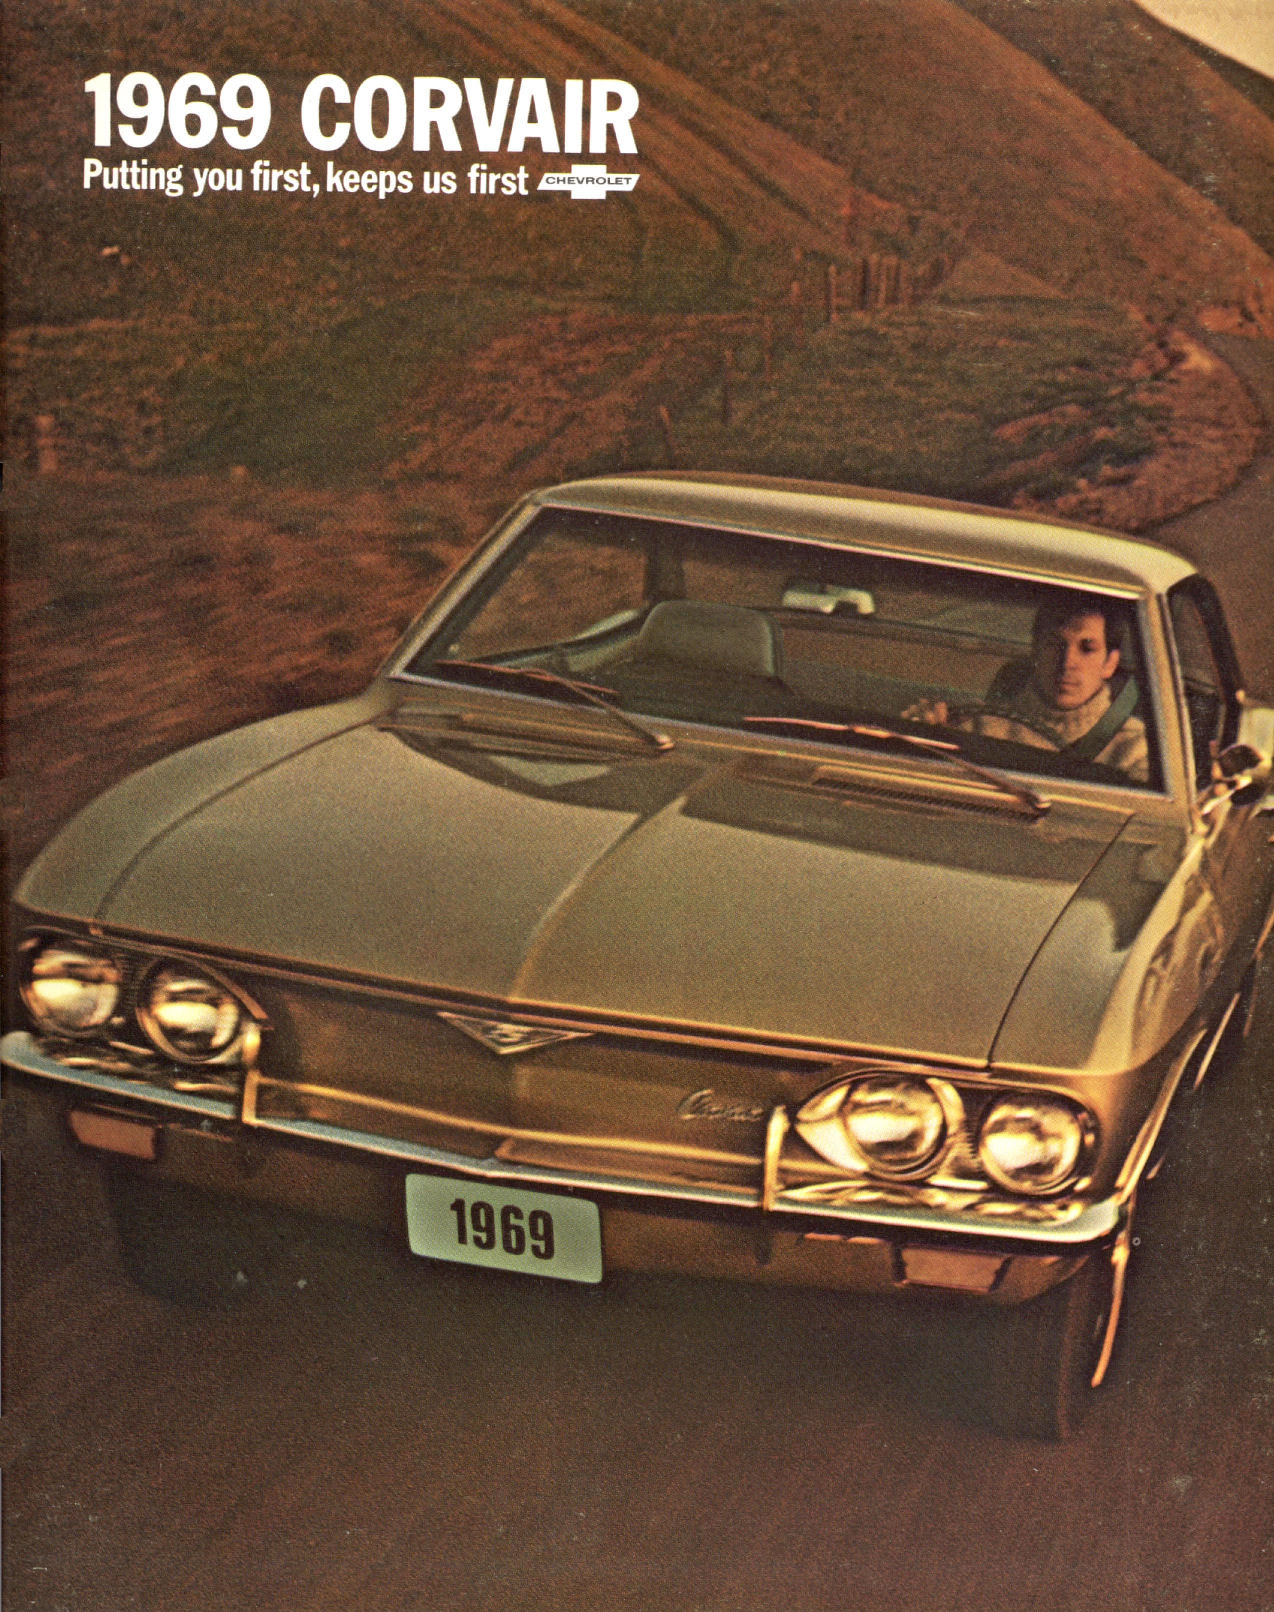 1969 Chevrolet Corvair Brochure Page 3